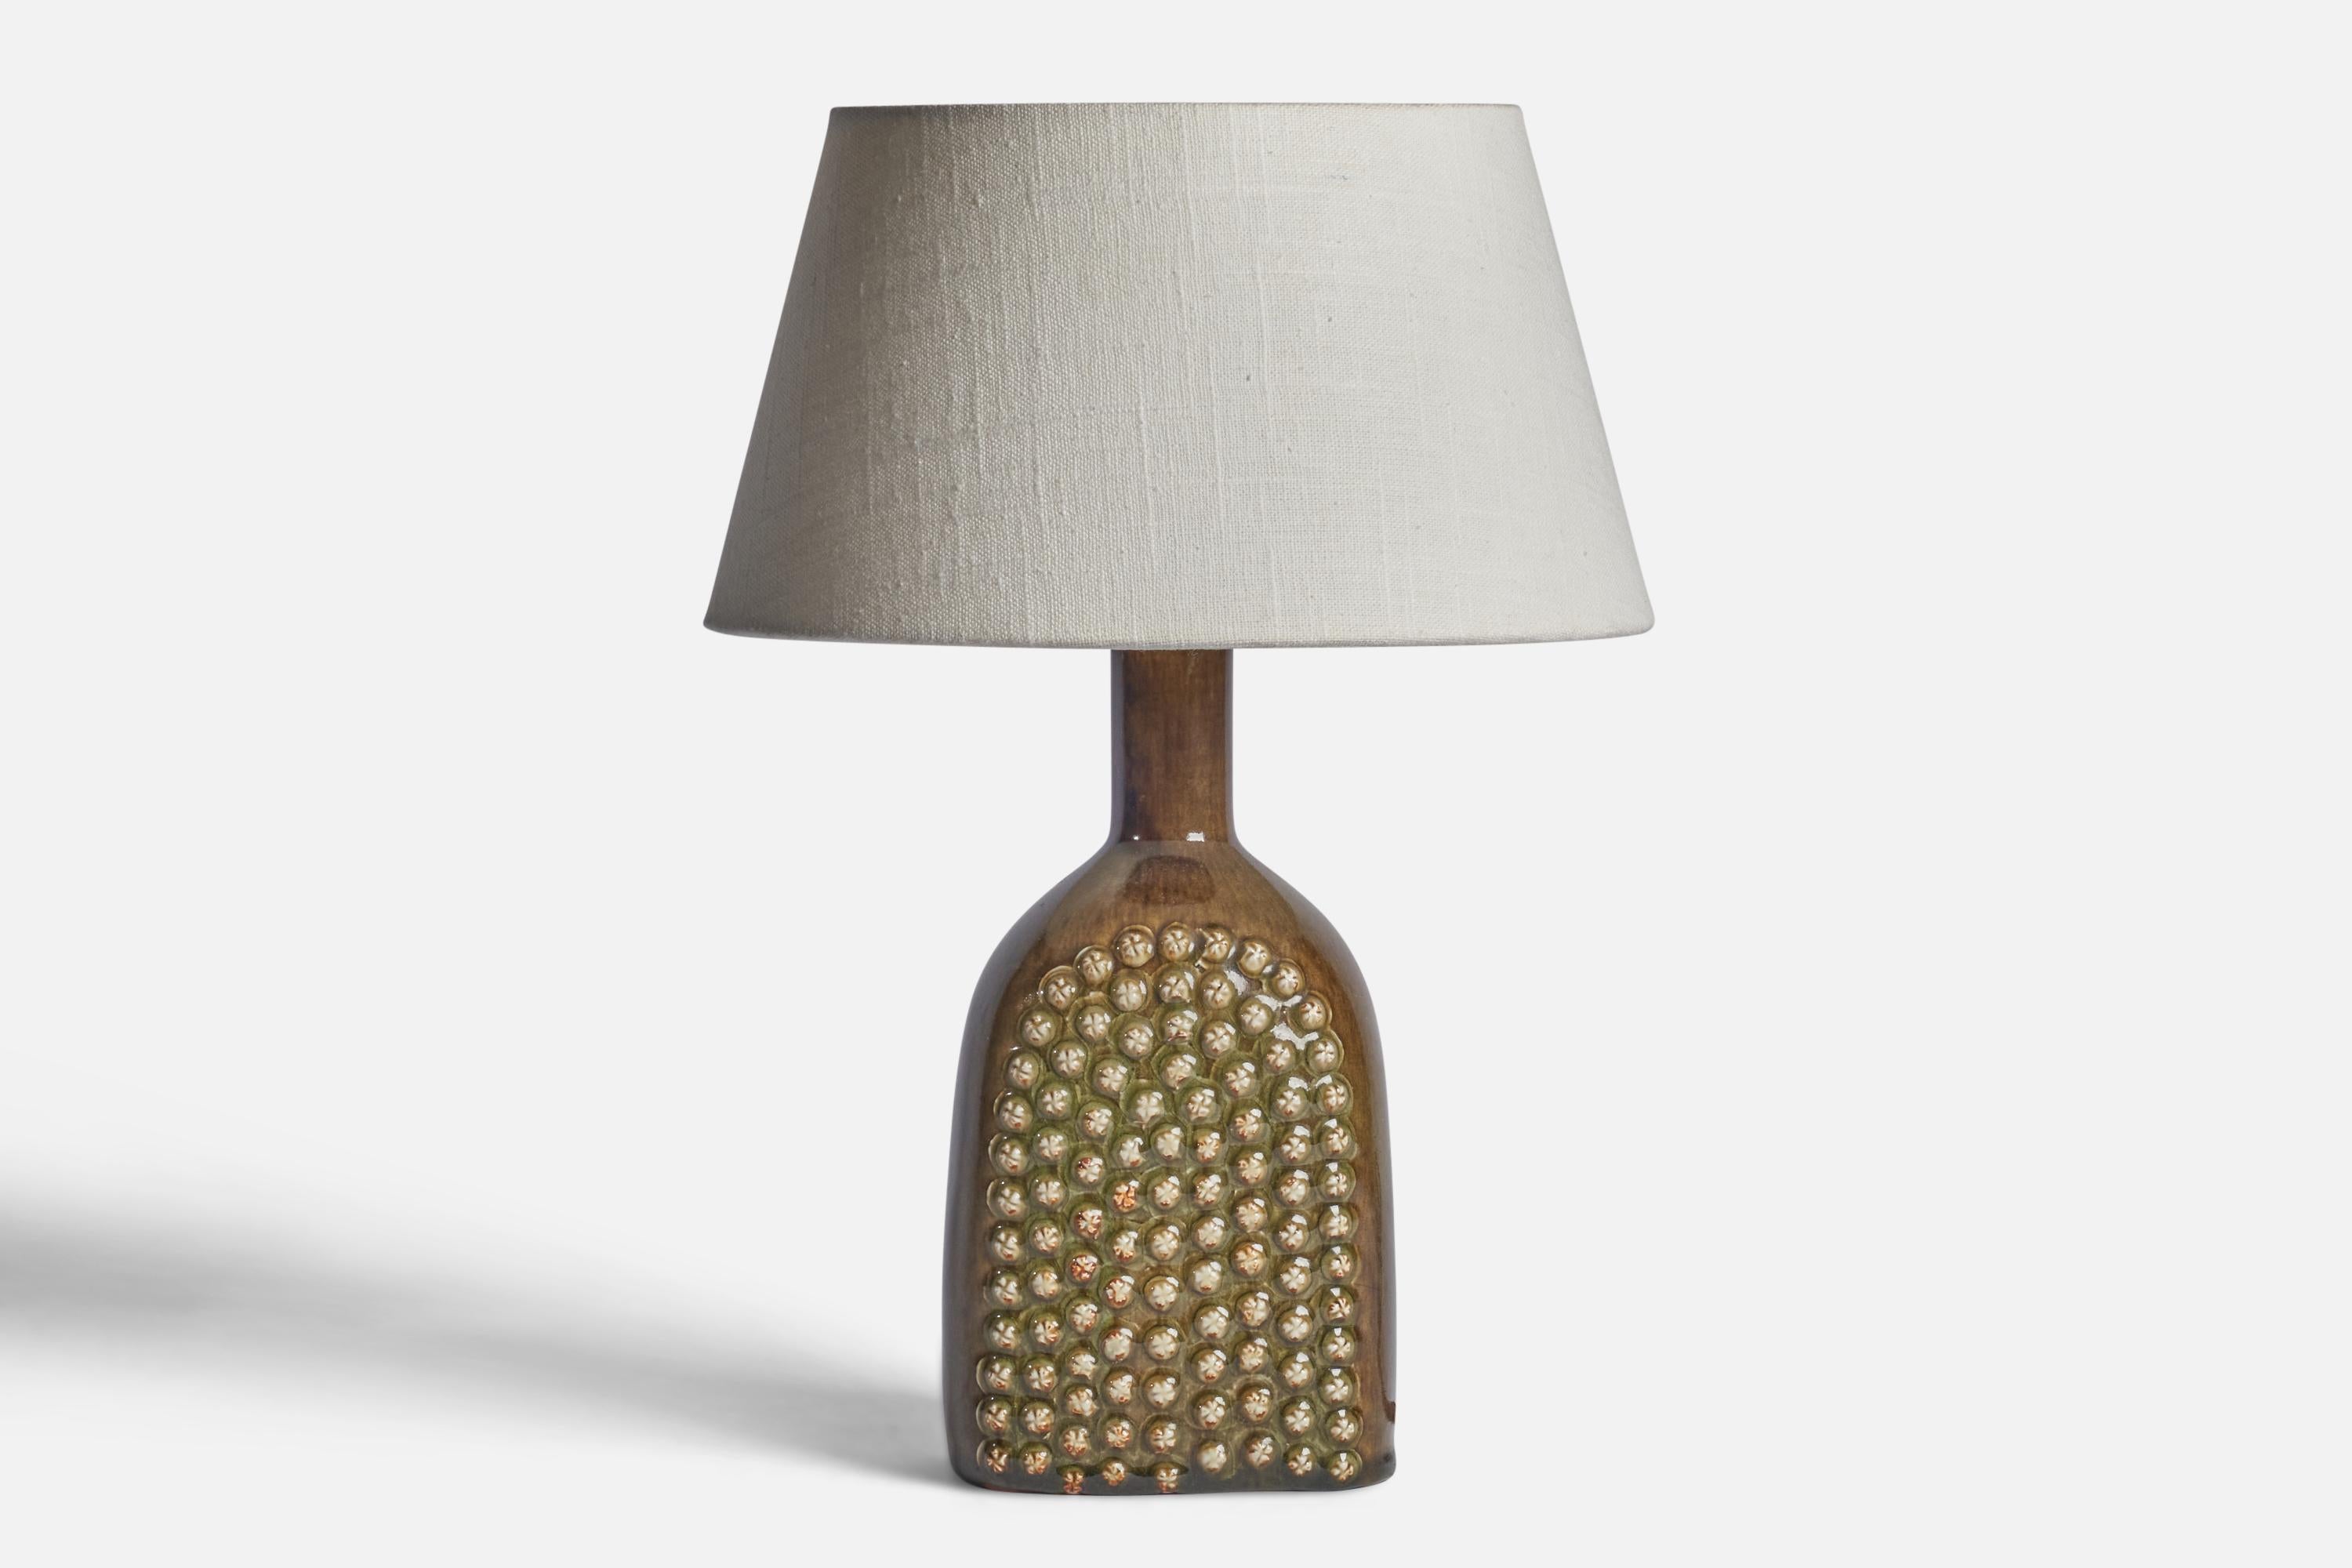 
A brown beige-glazed stoneware table lamp designed by Stig Lindberg and produced by Gustavsberg, Sweden, 1950s.
Dimensions of Lamp (inches): 11.25